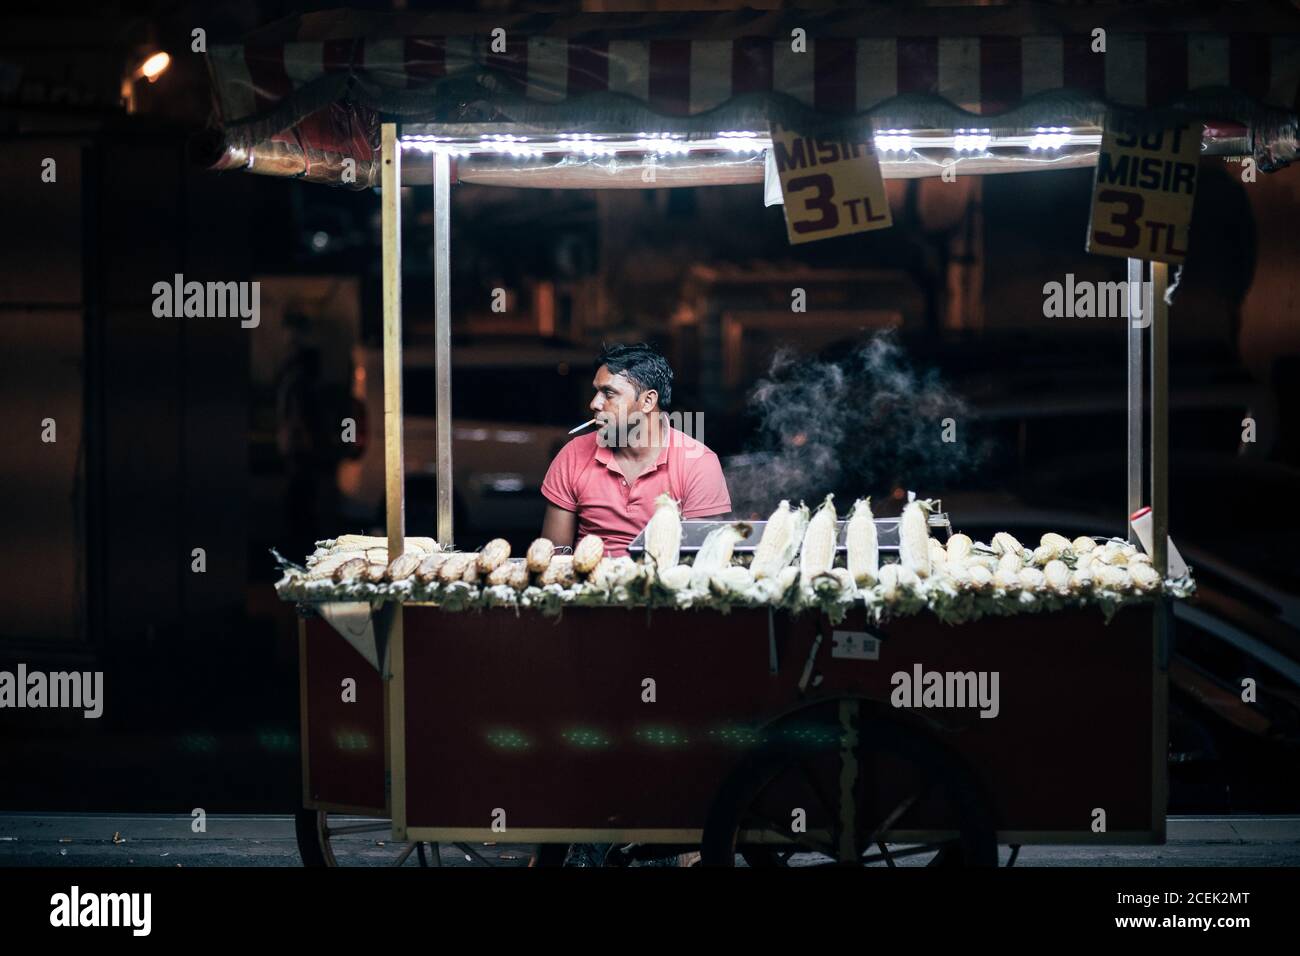 Istanbul, Turkey - July, 11 2018: Adult man sitting and smoking at counter with fresh corn at night Stock Photo